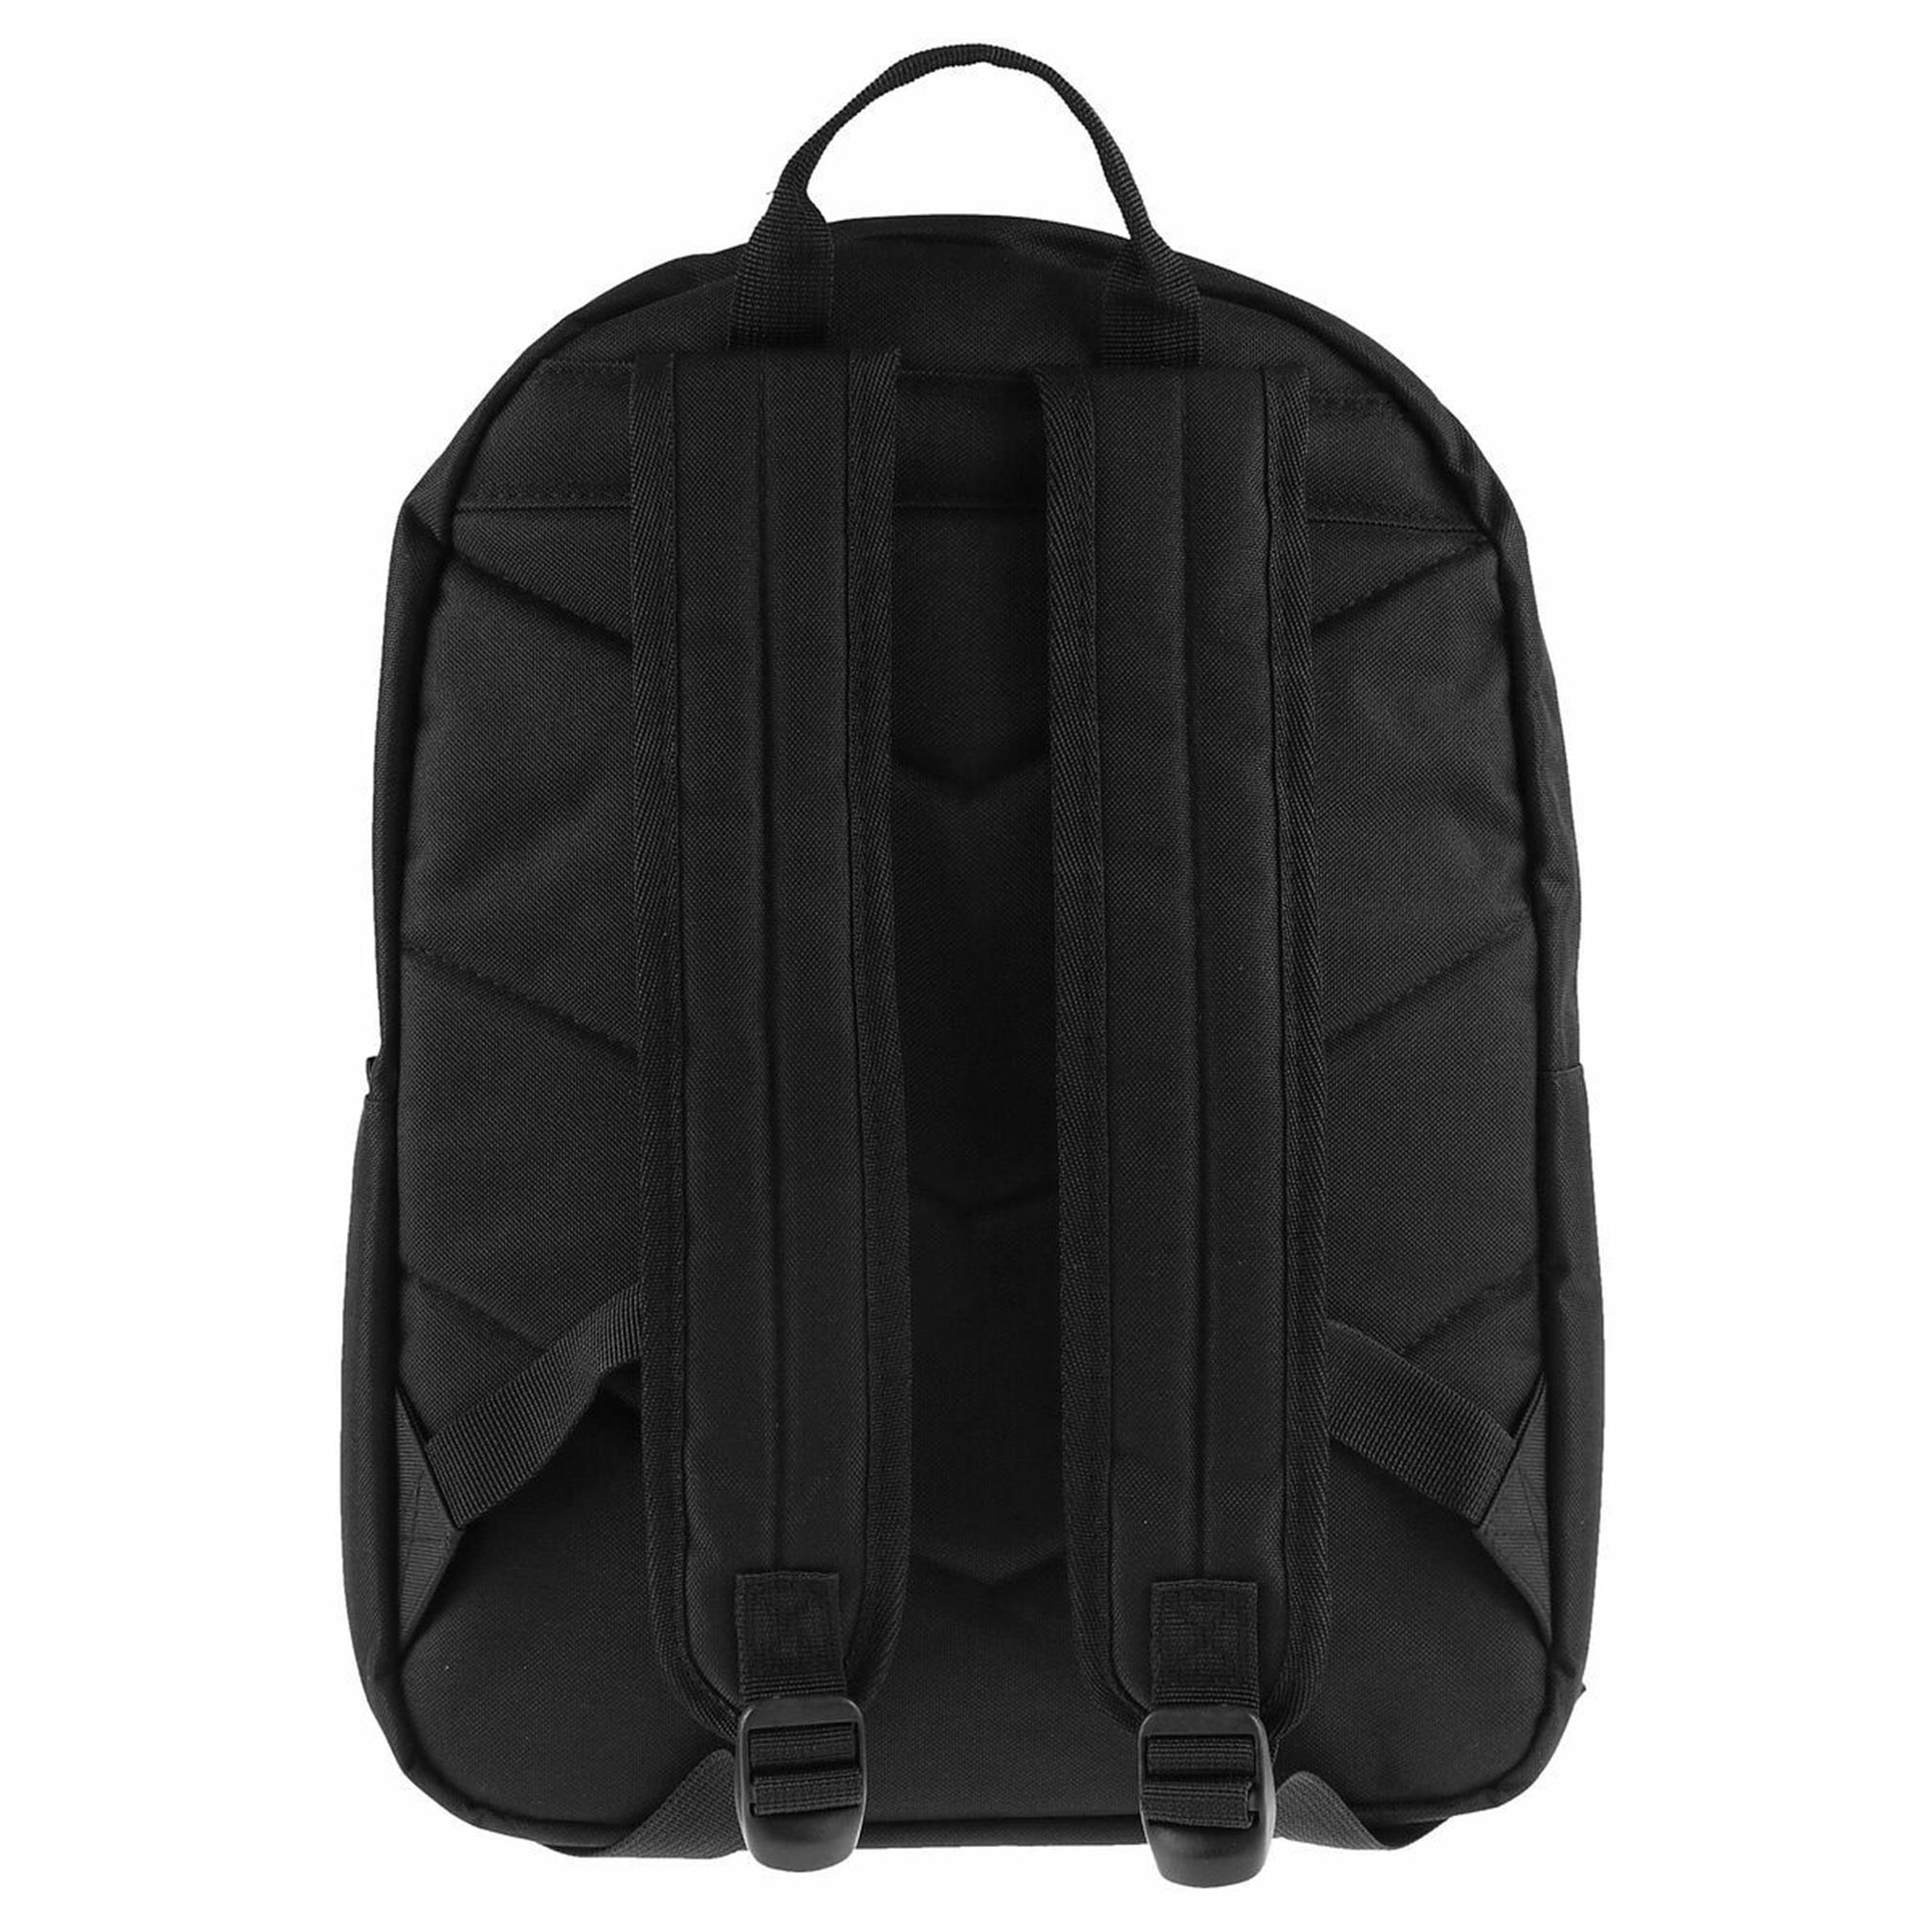 PWR UP 3 Backpack